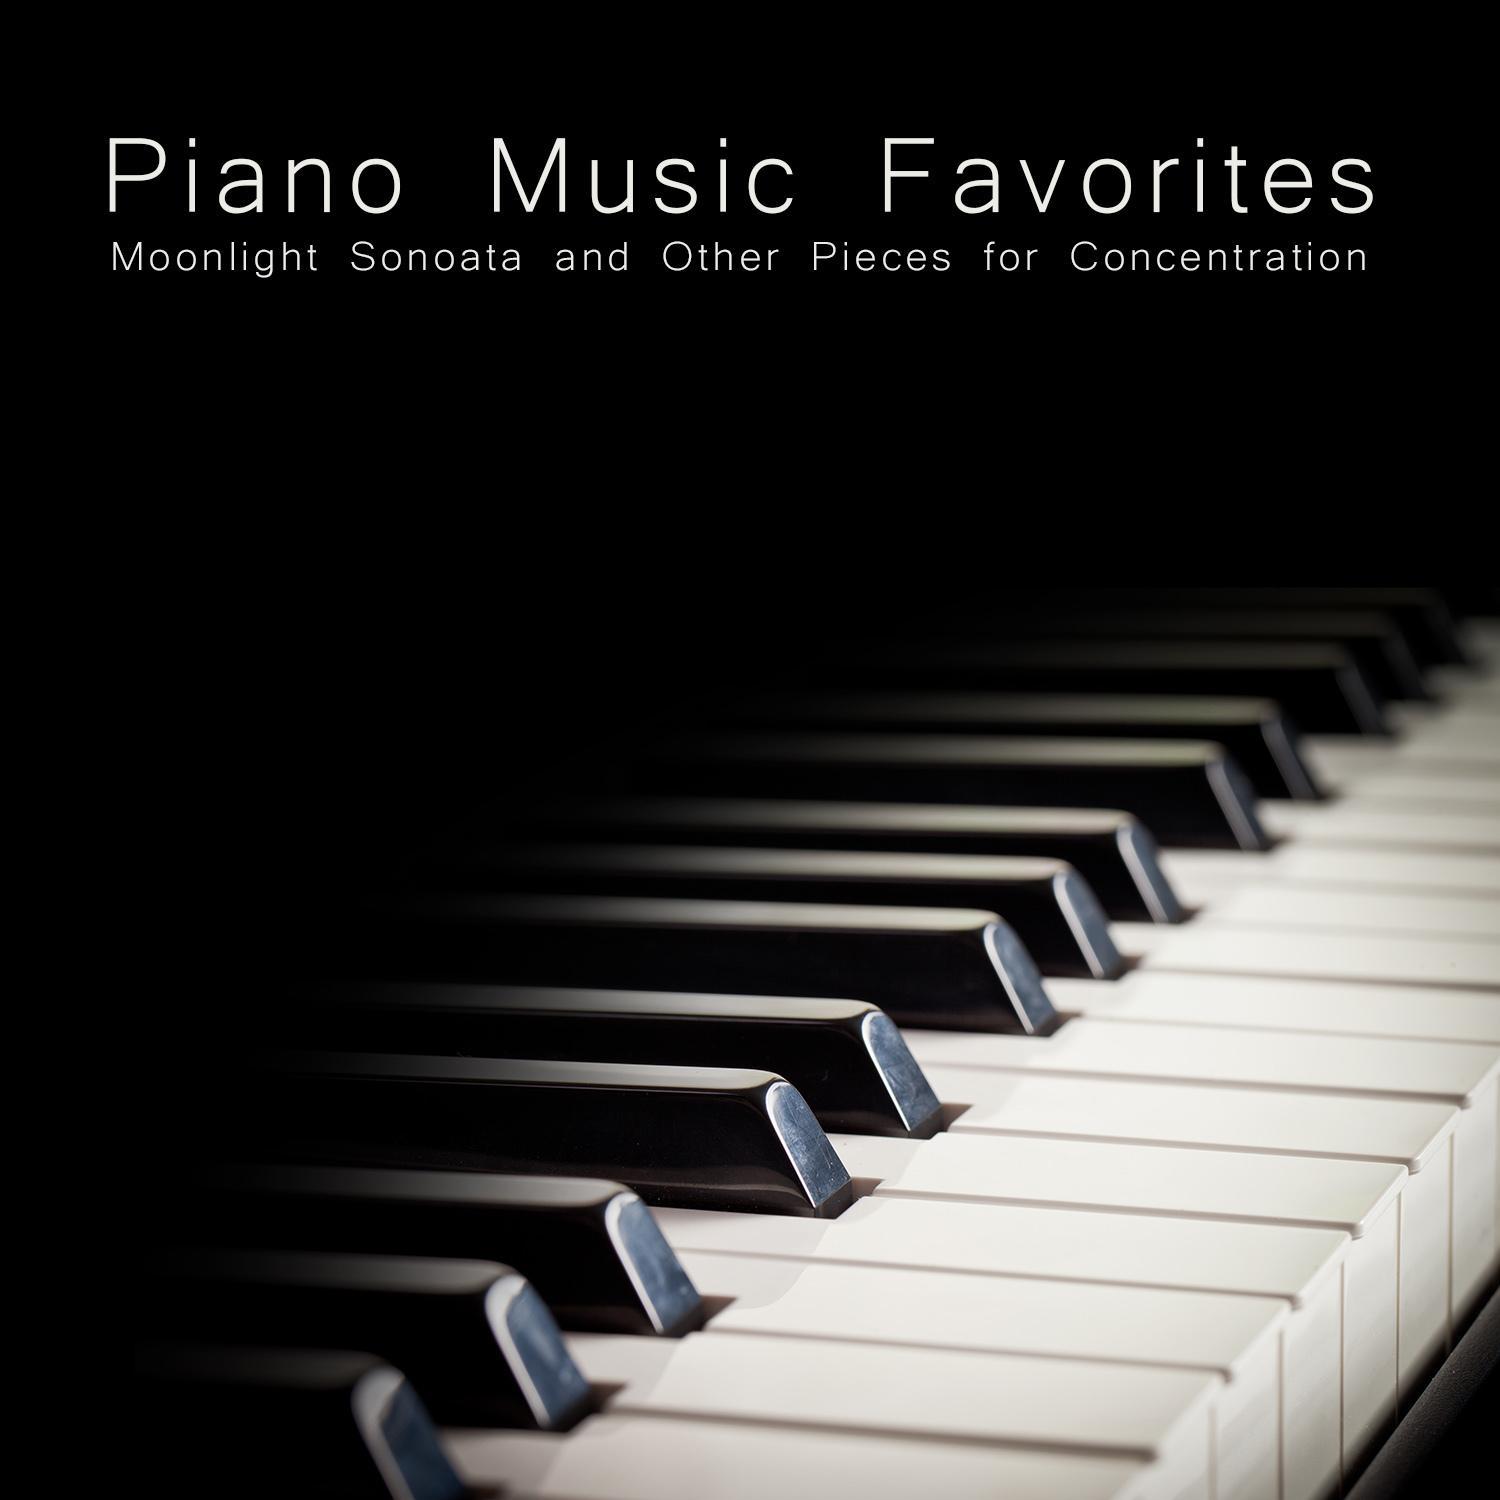 Piano Music Favorites - Moonlight Sonata and Other Pieces for Concentration